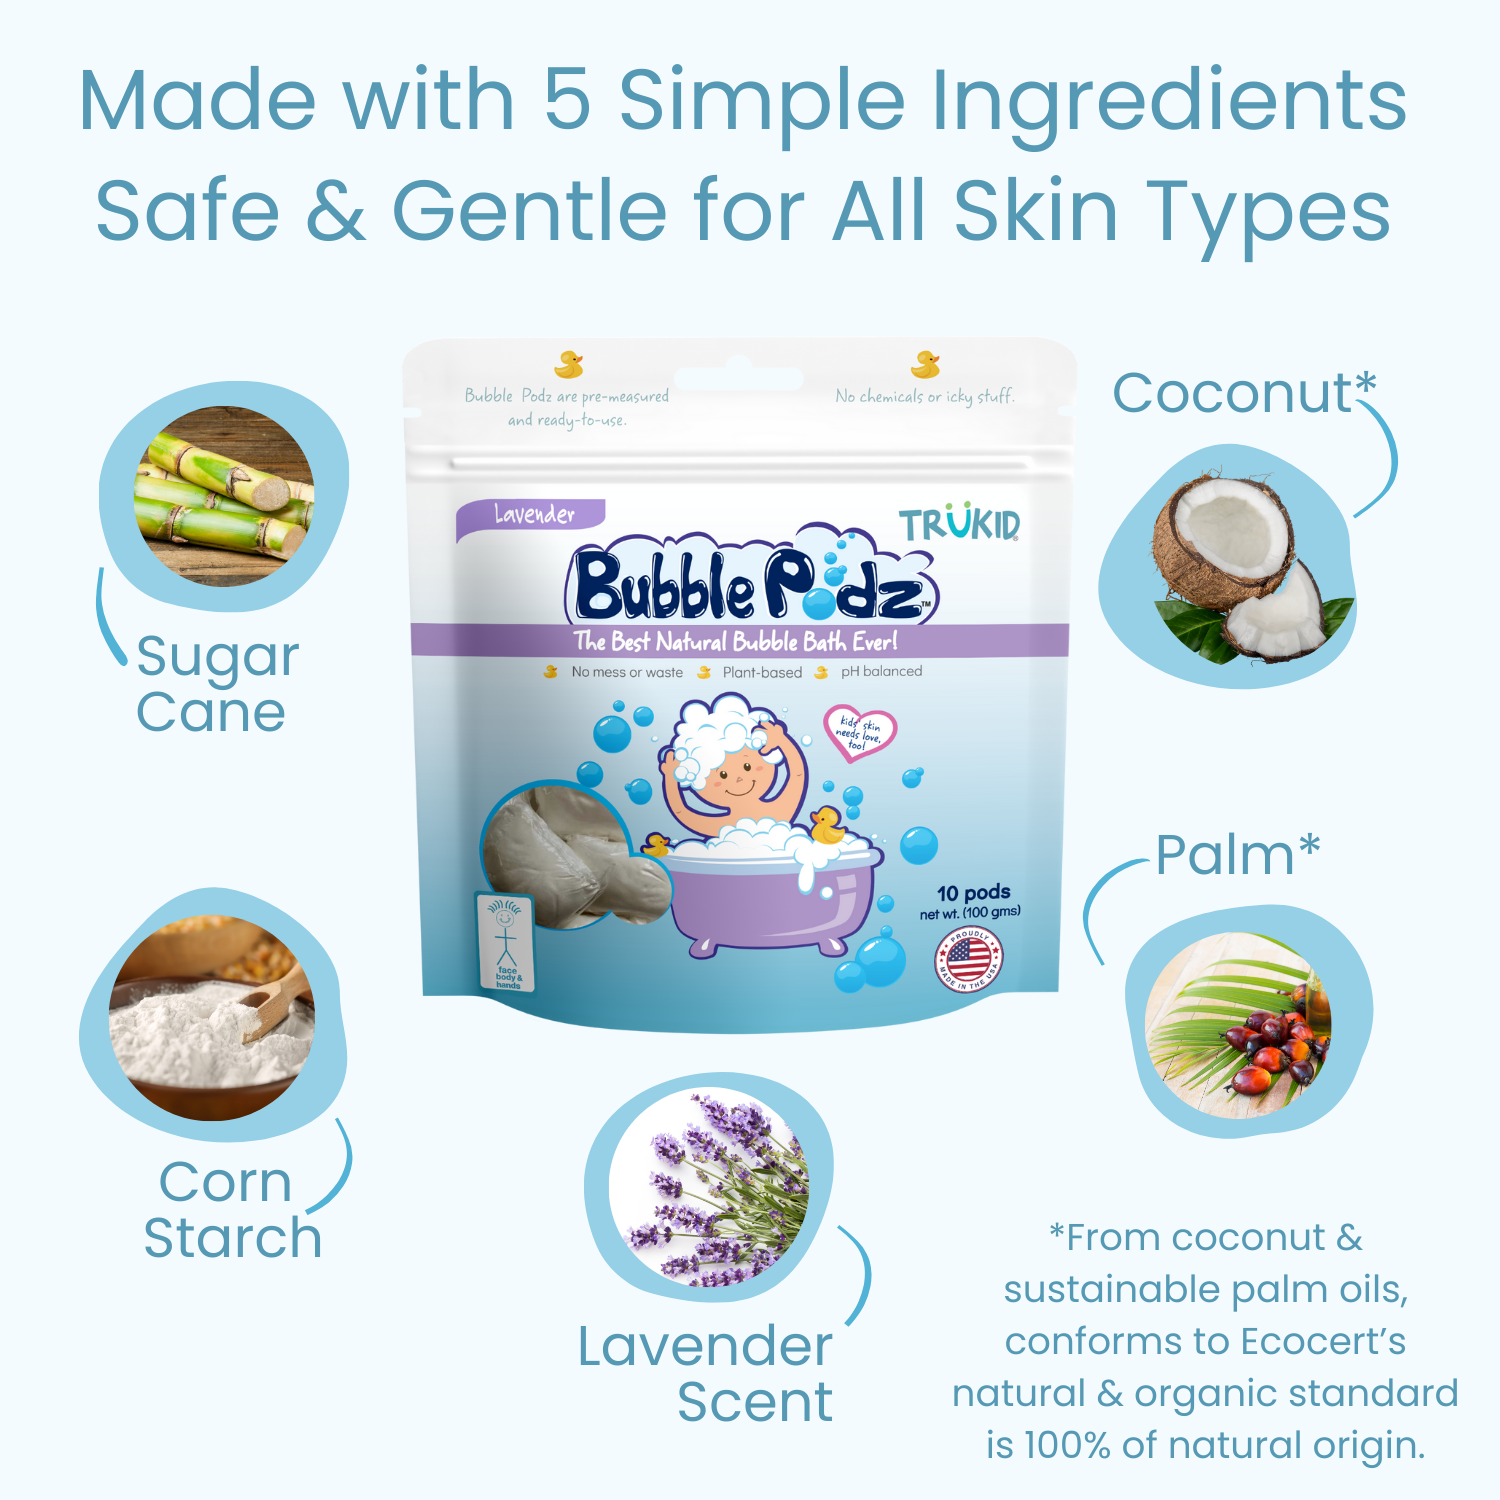 Made with 5 simple ingredients, safe and gentle for all skin types.